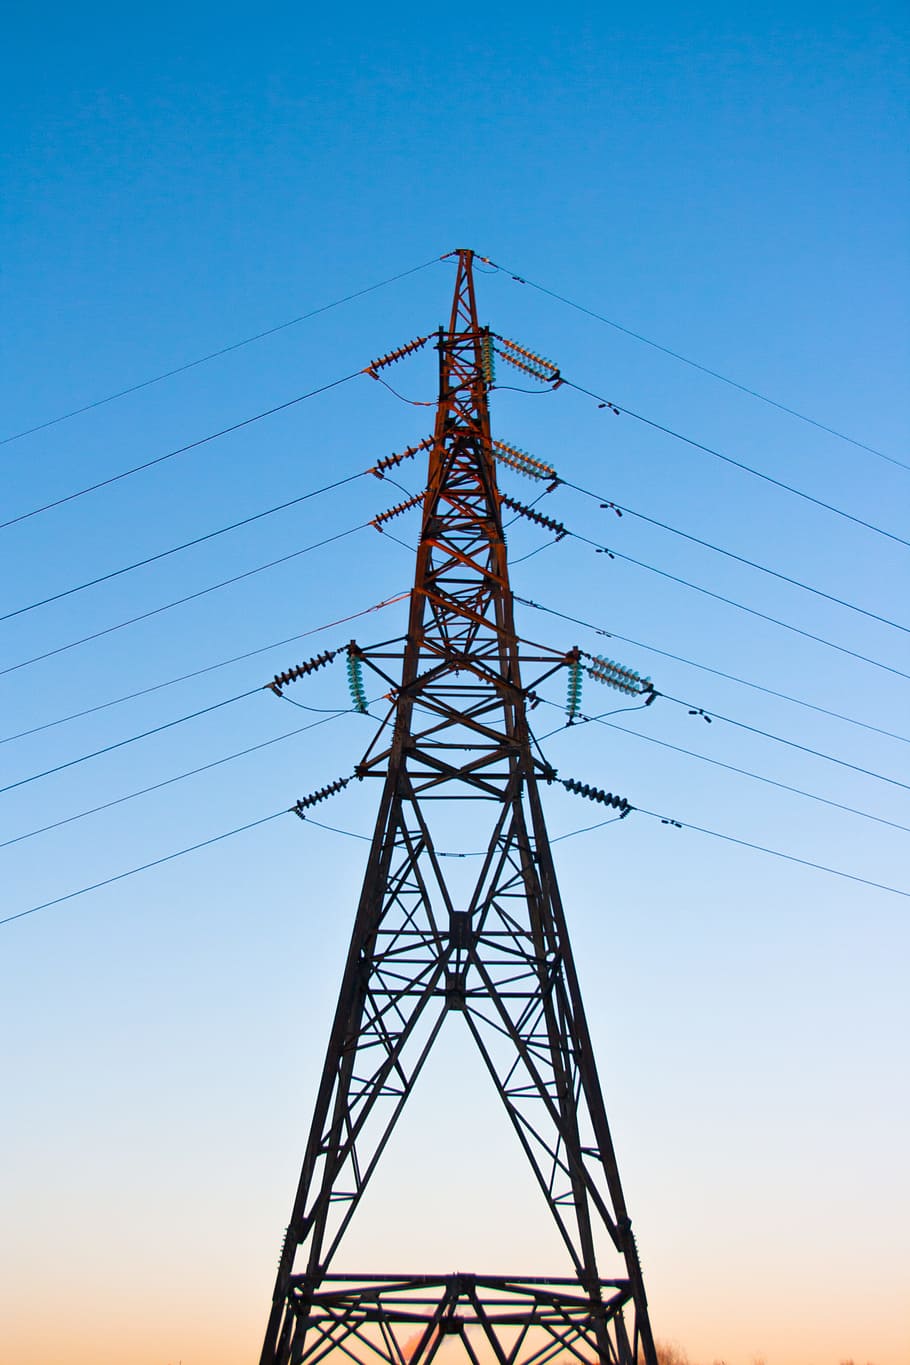 mast, power, electricity, lines, voltage, industrial, high, powerlines, blue, transmission